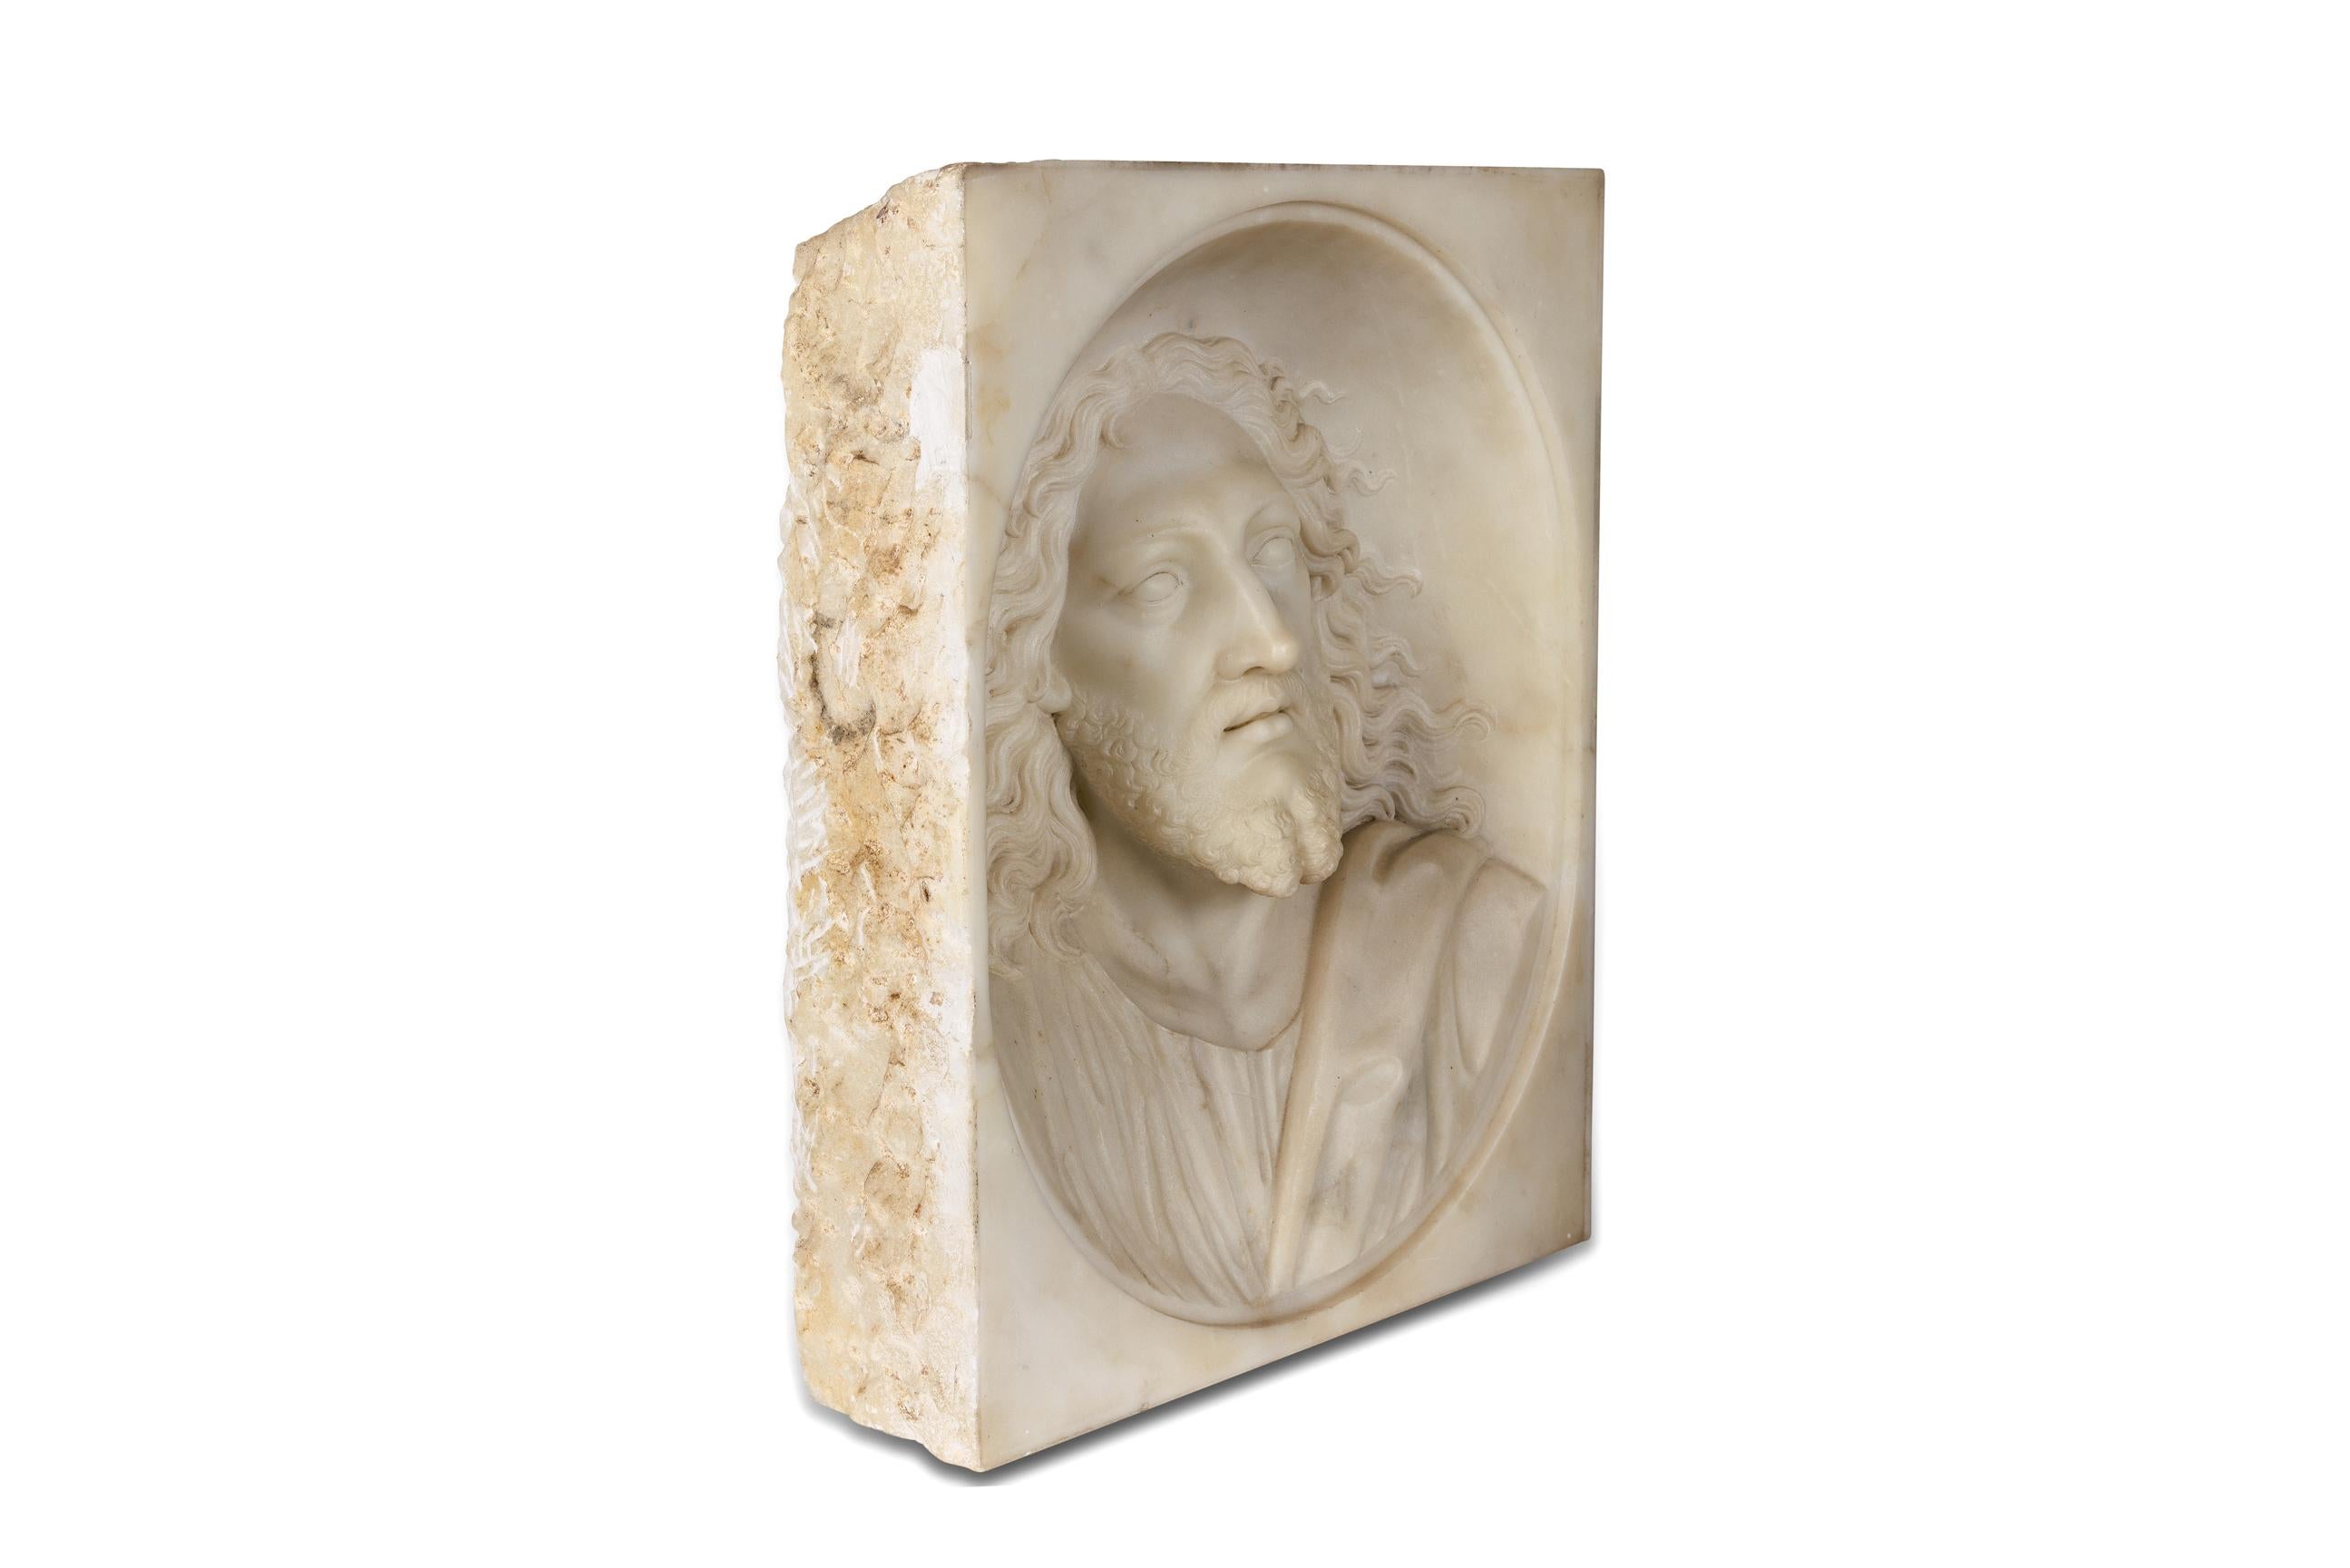 Rare and Important Italian White Marble Bust Sculpture of Jesus Christ, C. 1850

A truly exceptionally carved marble relief of Holy Jesus Christ. Very powerful and dramatic- a museum worthy sculpture. 

Unsigned, but definitely by a master Italian